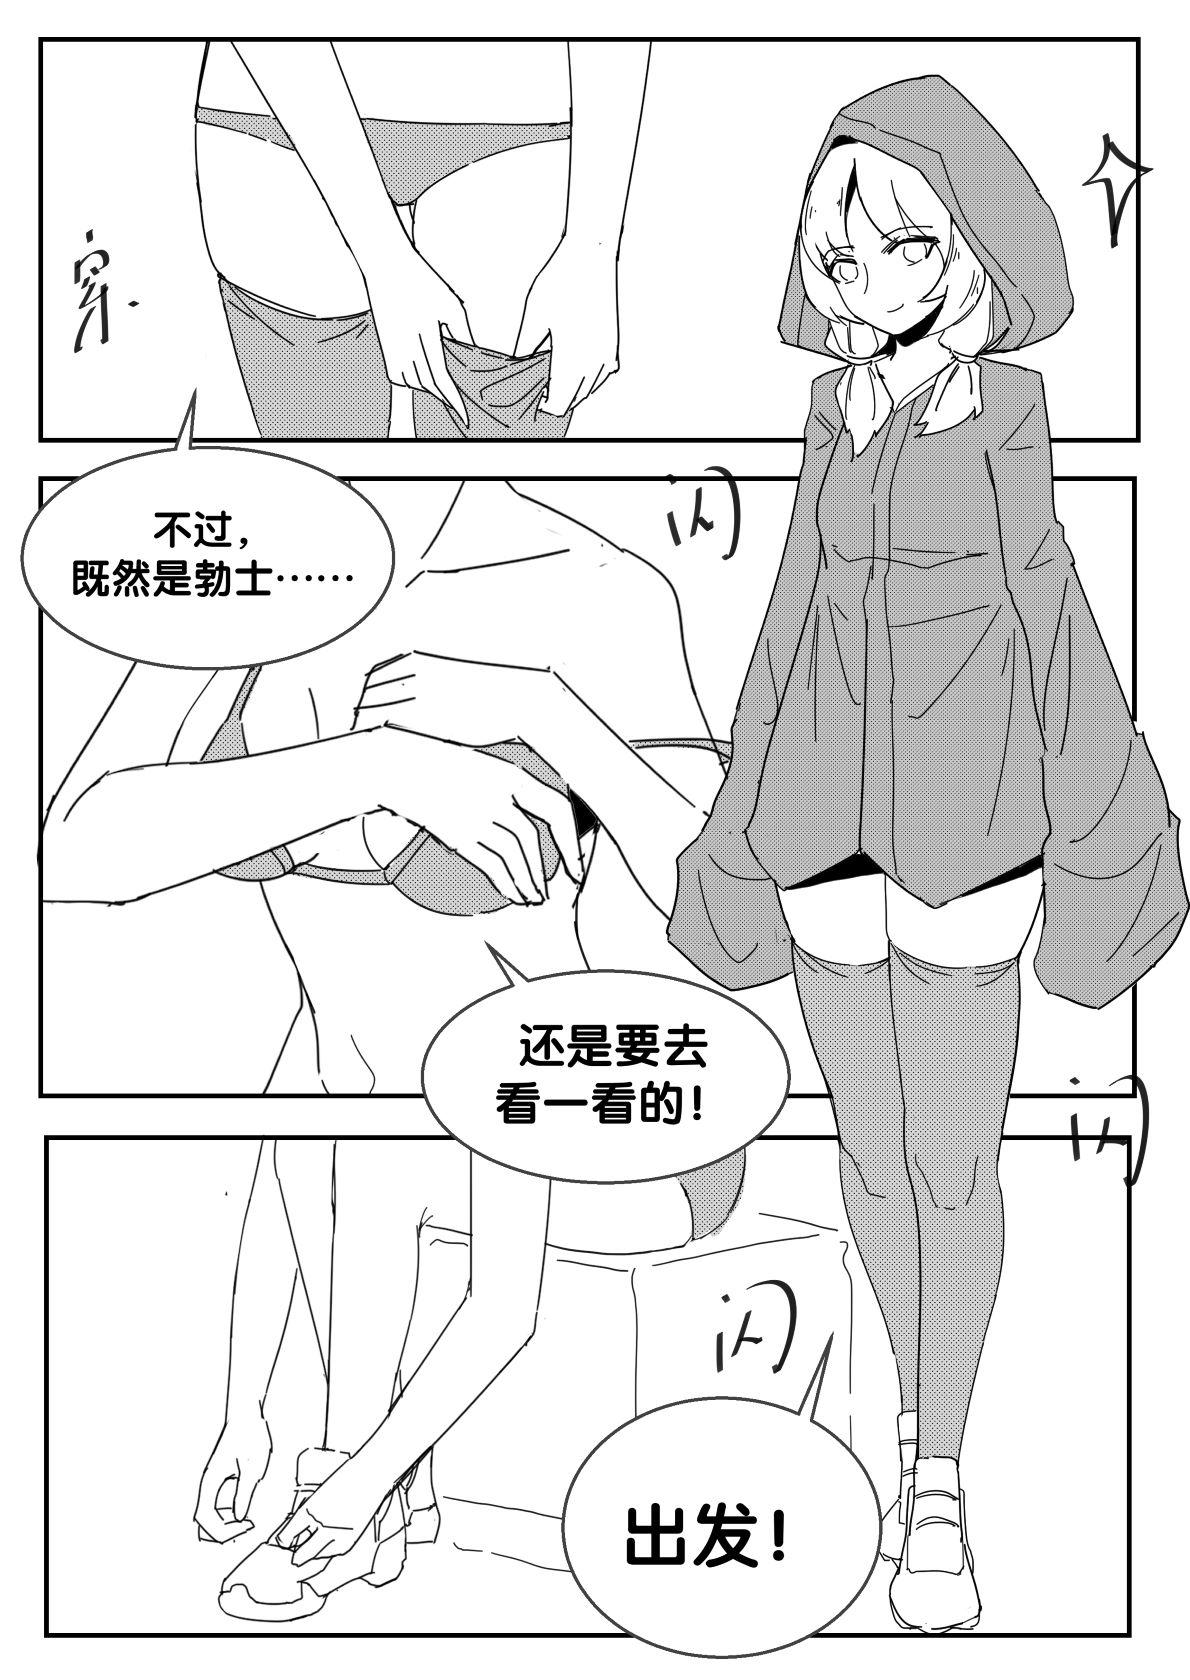 Stepfather 勃士日常其二 - Arknights Pregnant - Page 8